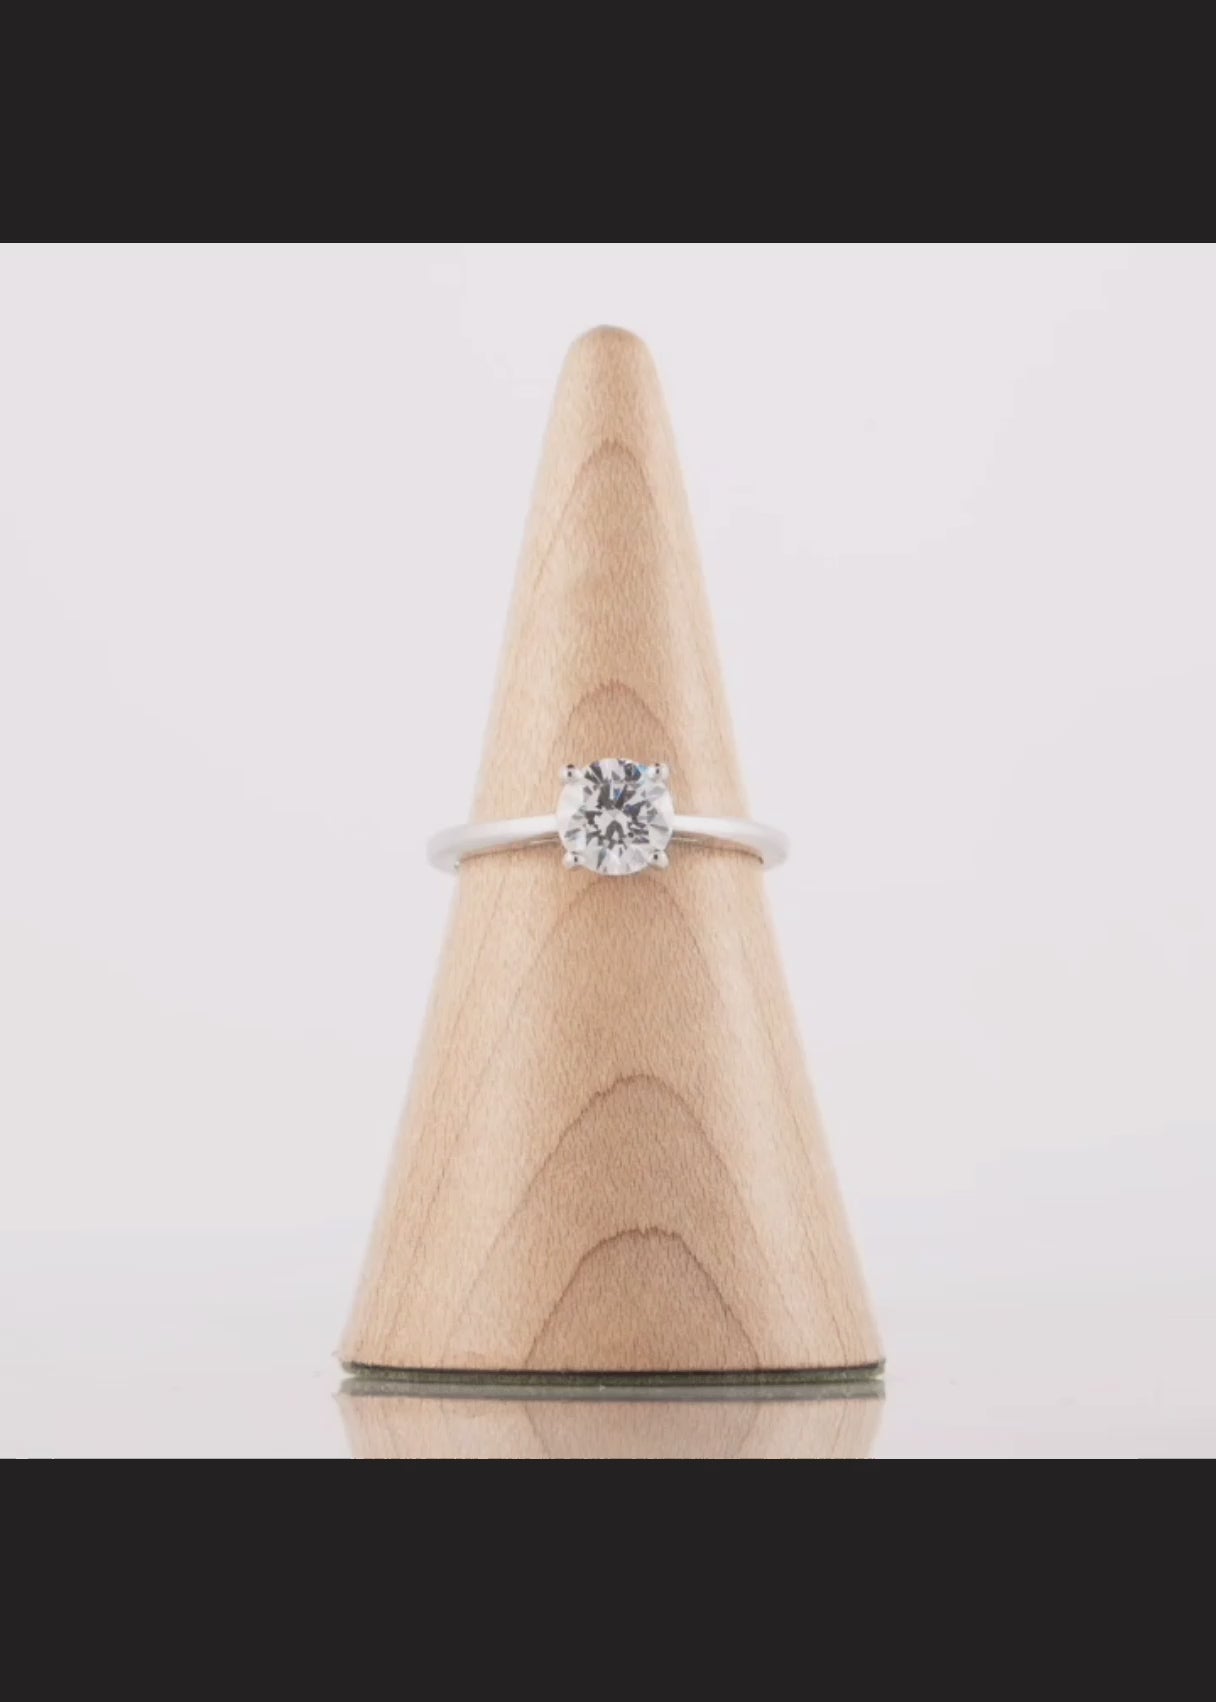 Video shows the solitaire diamond engagement ring rotating for a 360 degree view